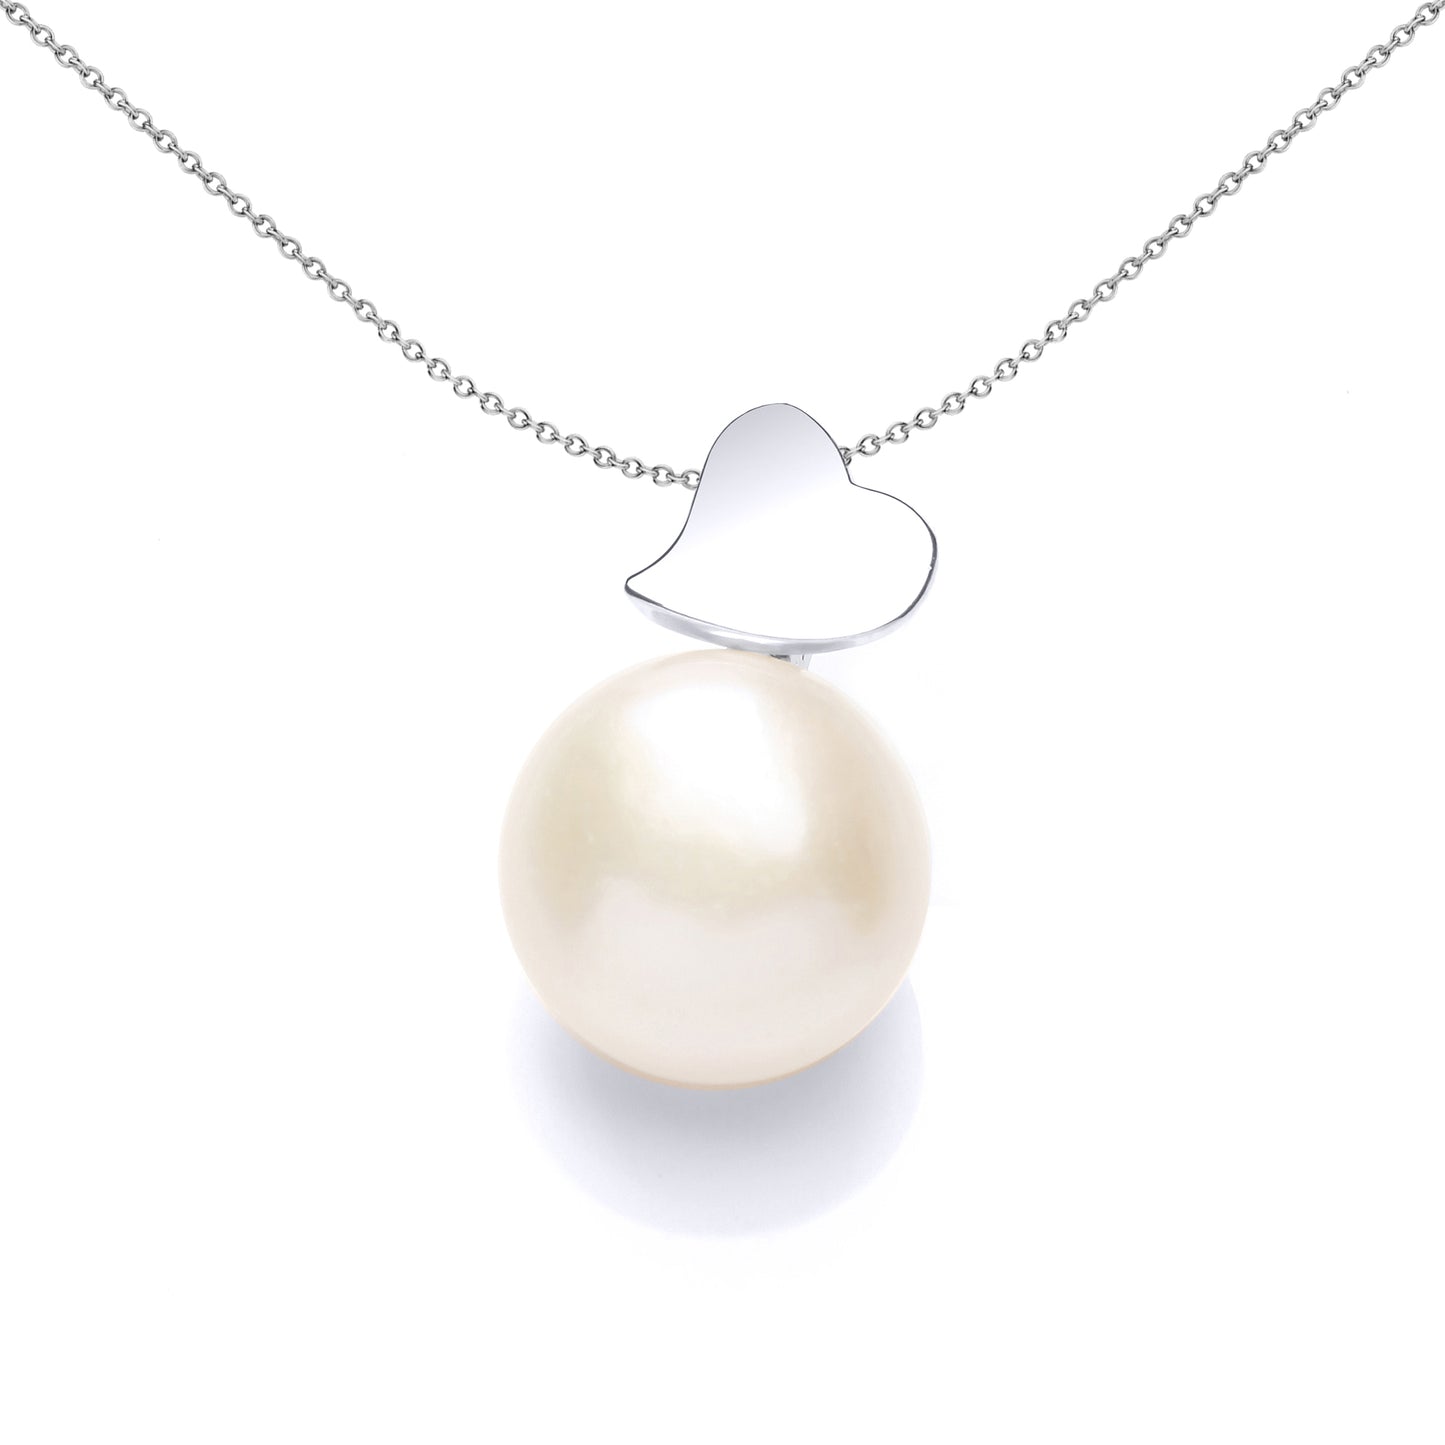 Silver  Pearl Full Moon Love Heart Charm Necklace 12mm 18 inch - GVP546